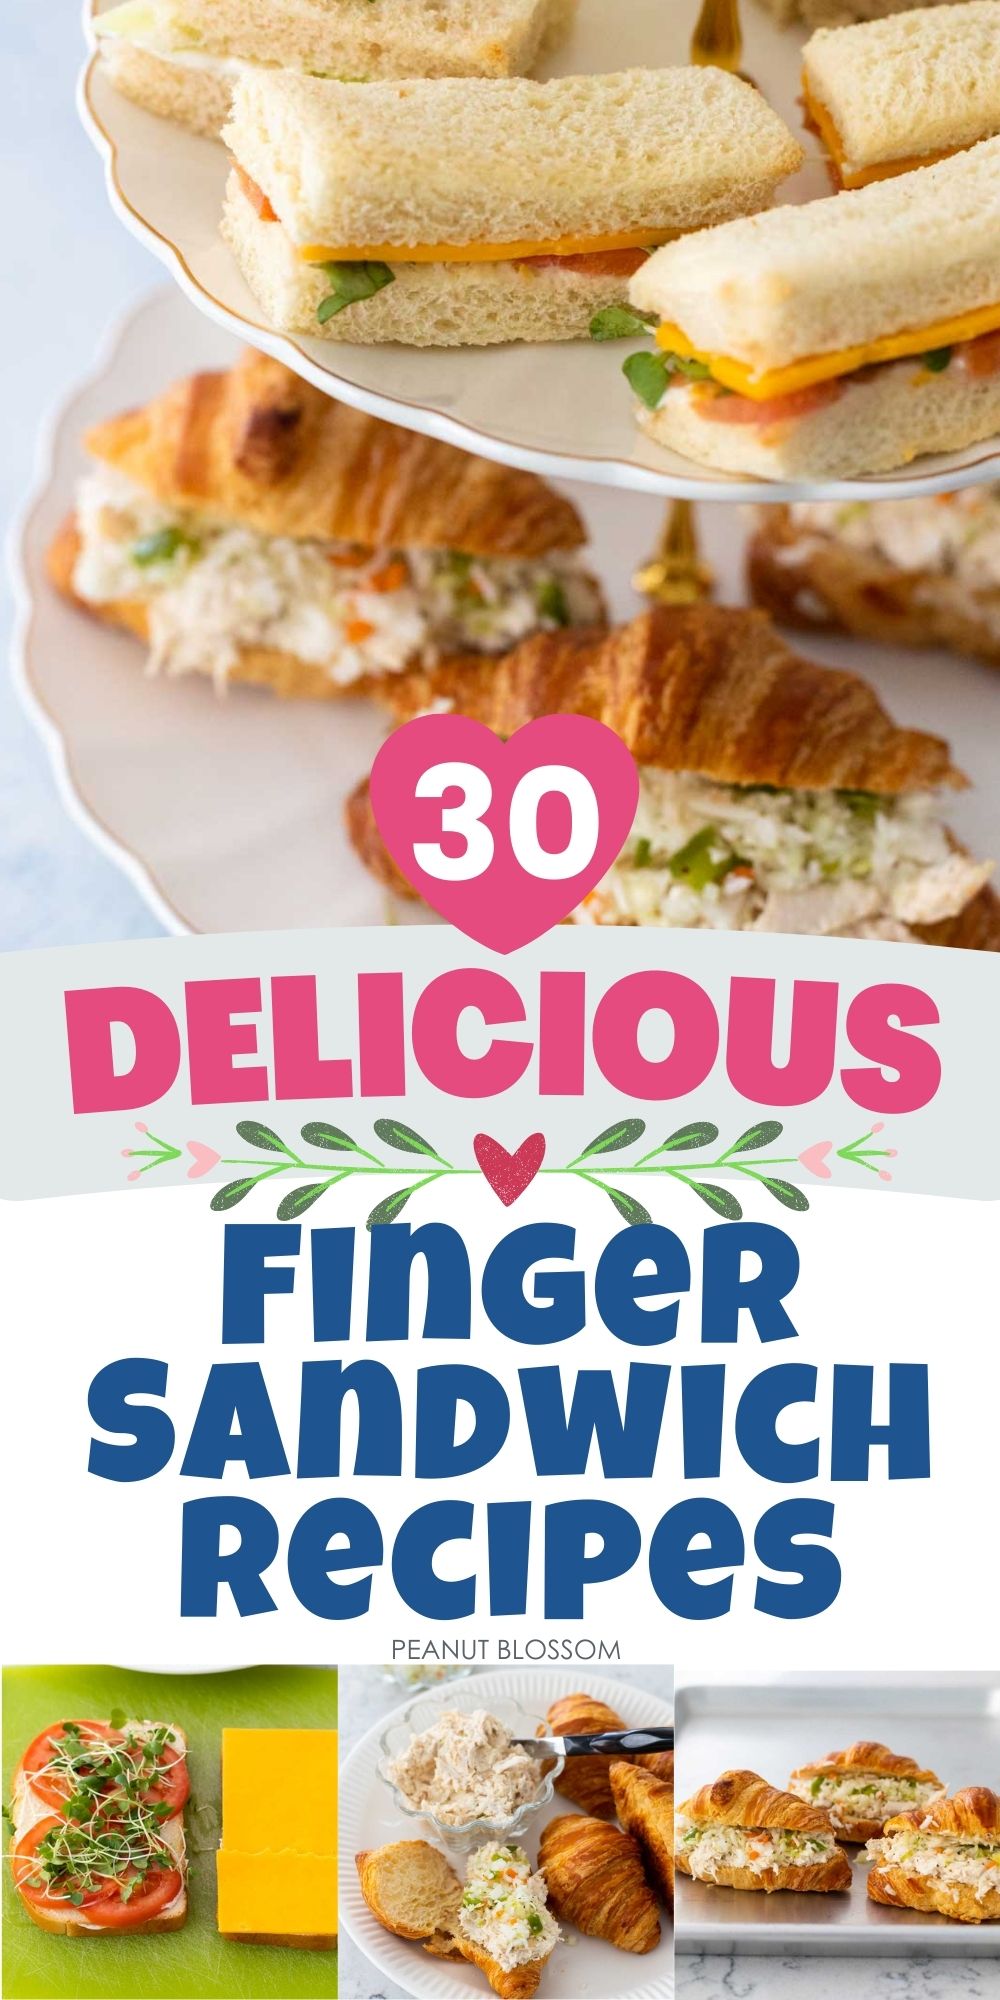 A photo collage shows a tray of finger sandwiches above a few photos of how to assemble and prep them.